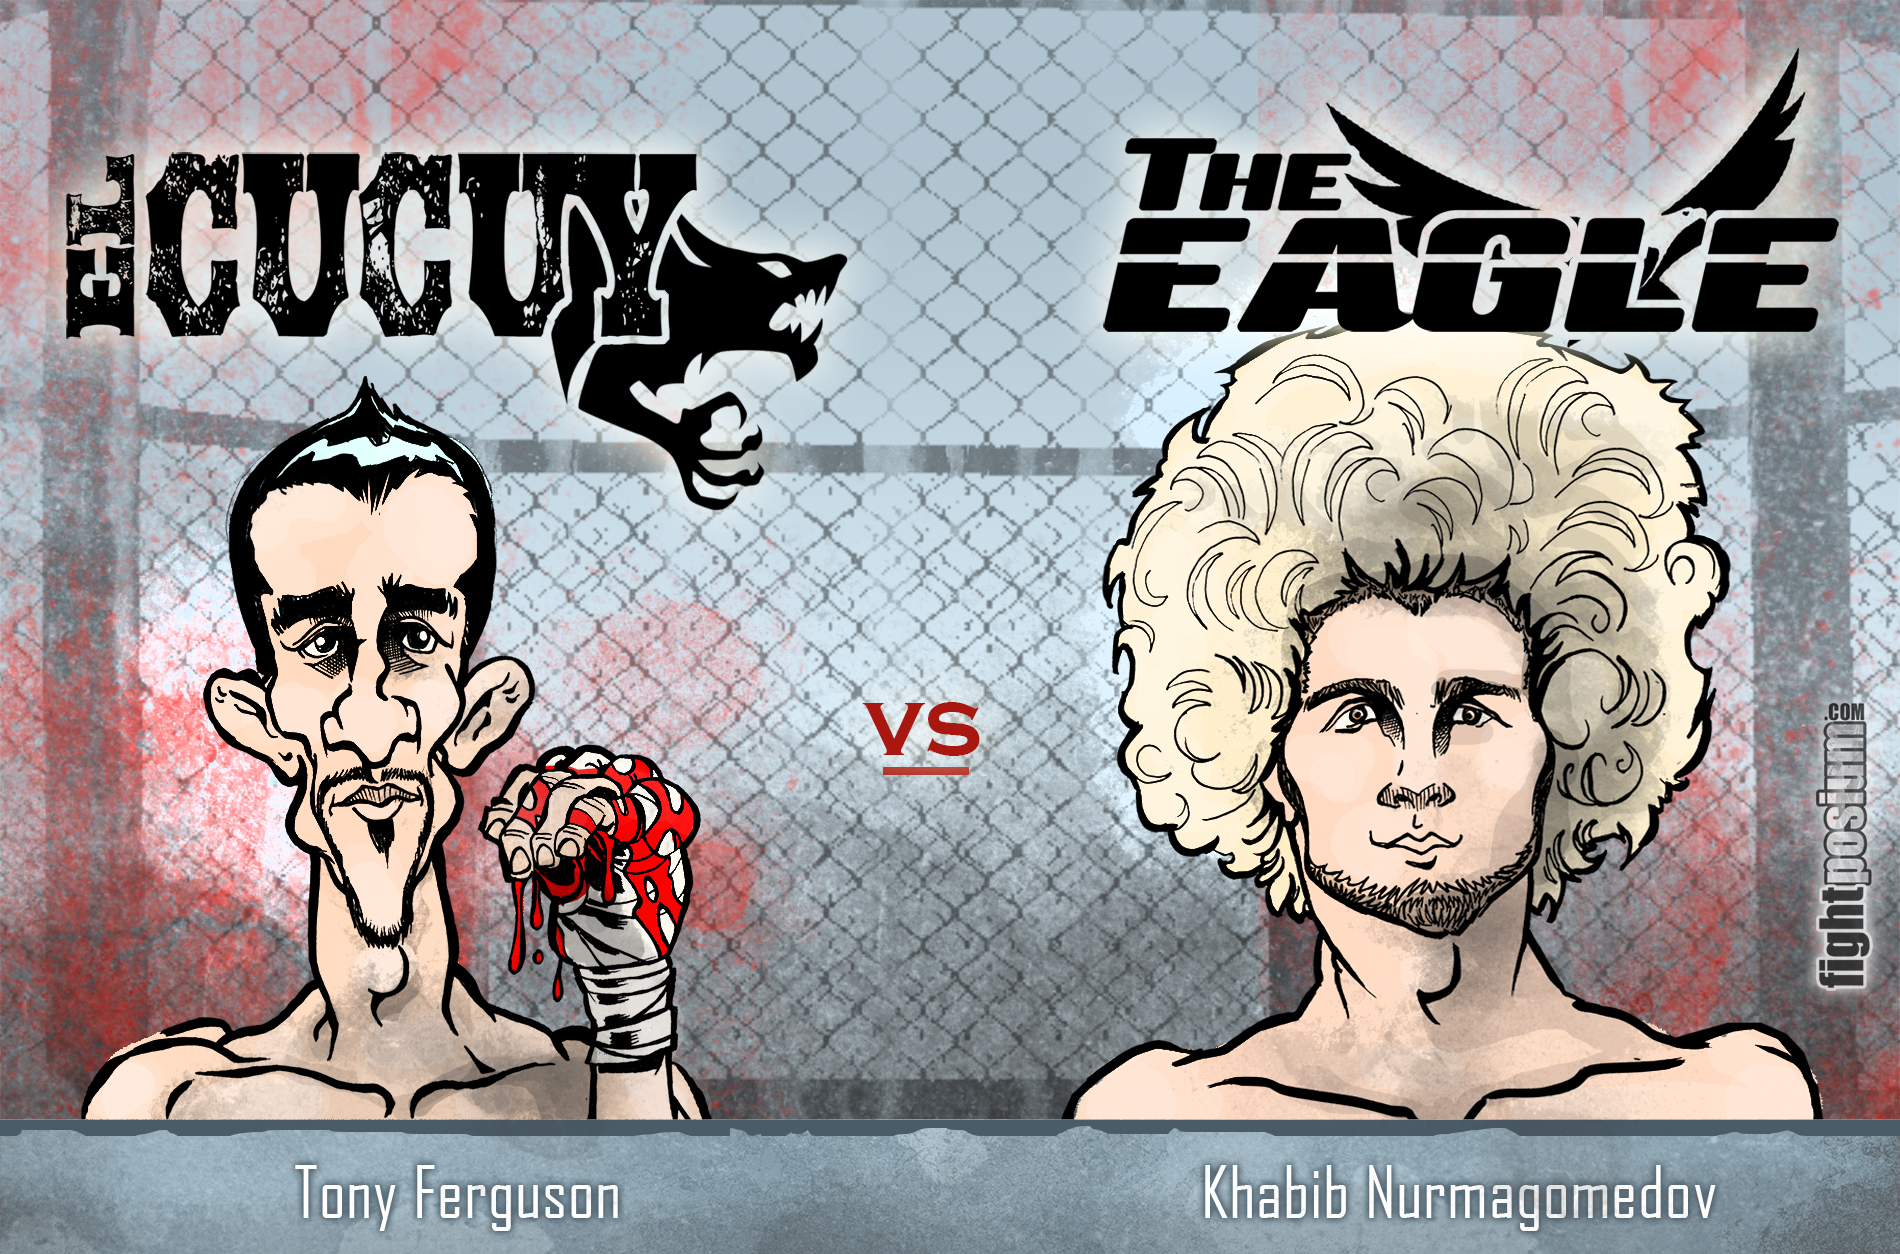 You are currently viewing The Eagle vs El Cucuy on UFC on FOX 19